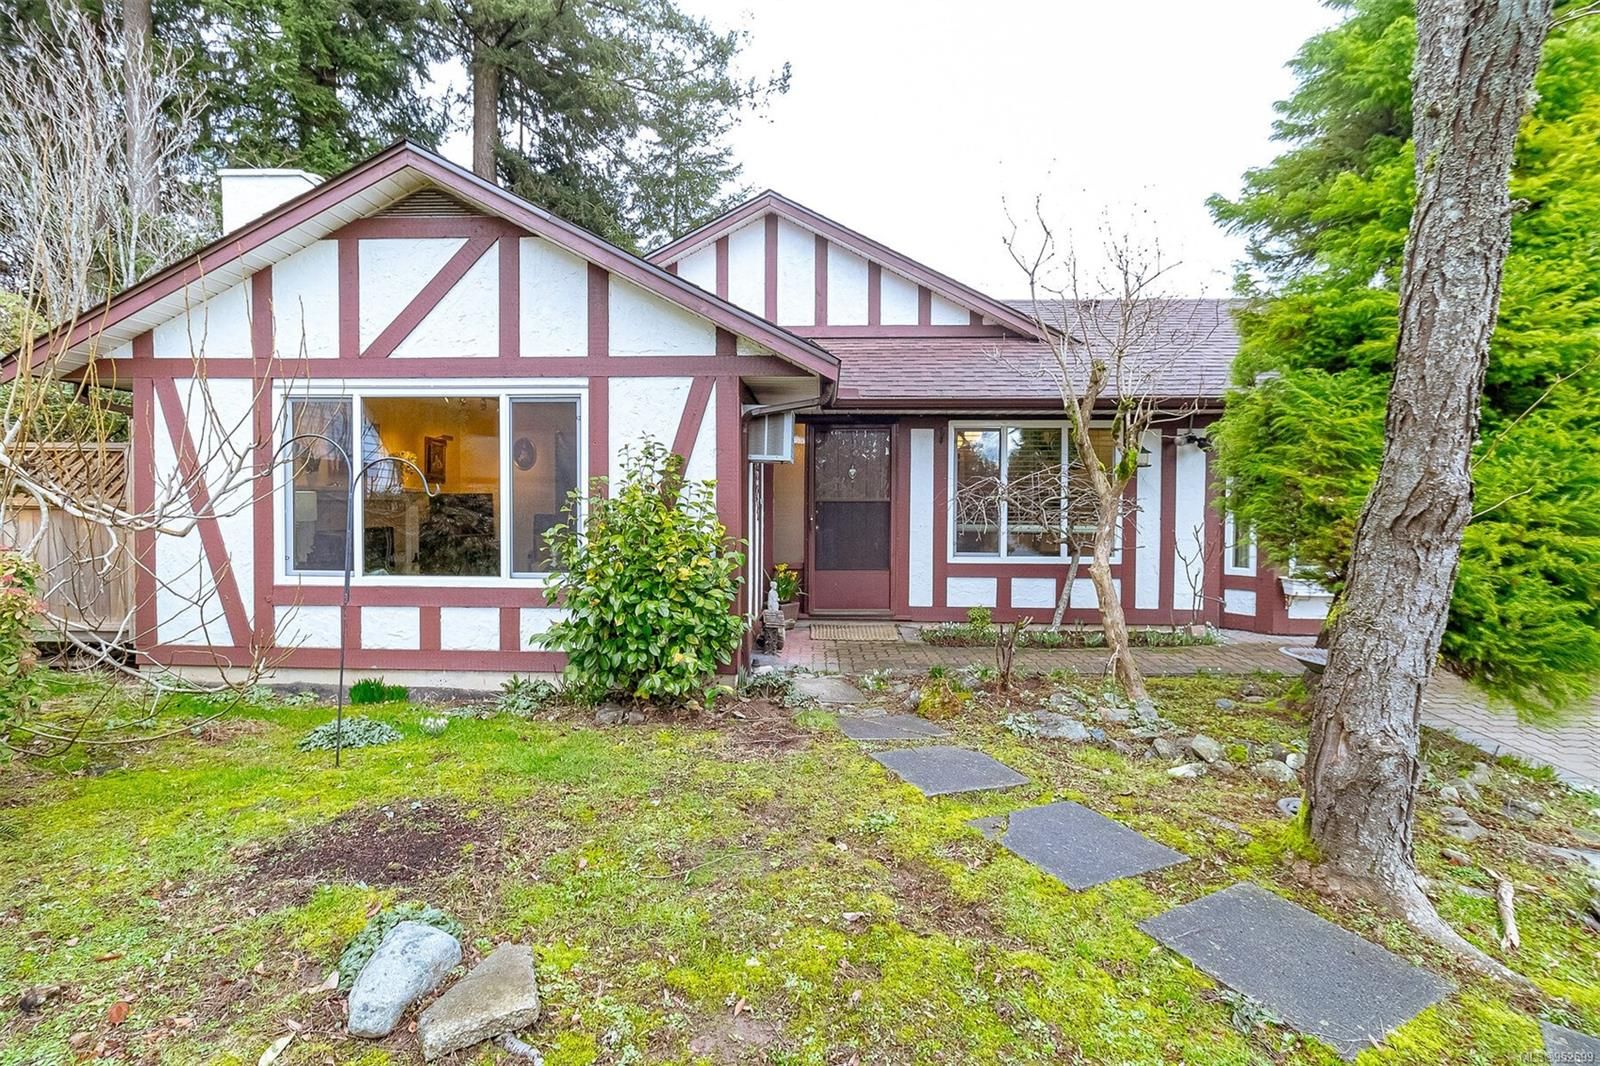 Lovingly maintained 3 bedroom rancher